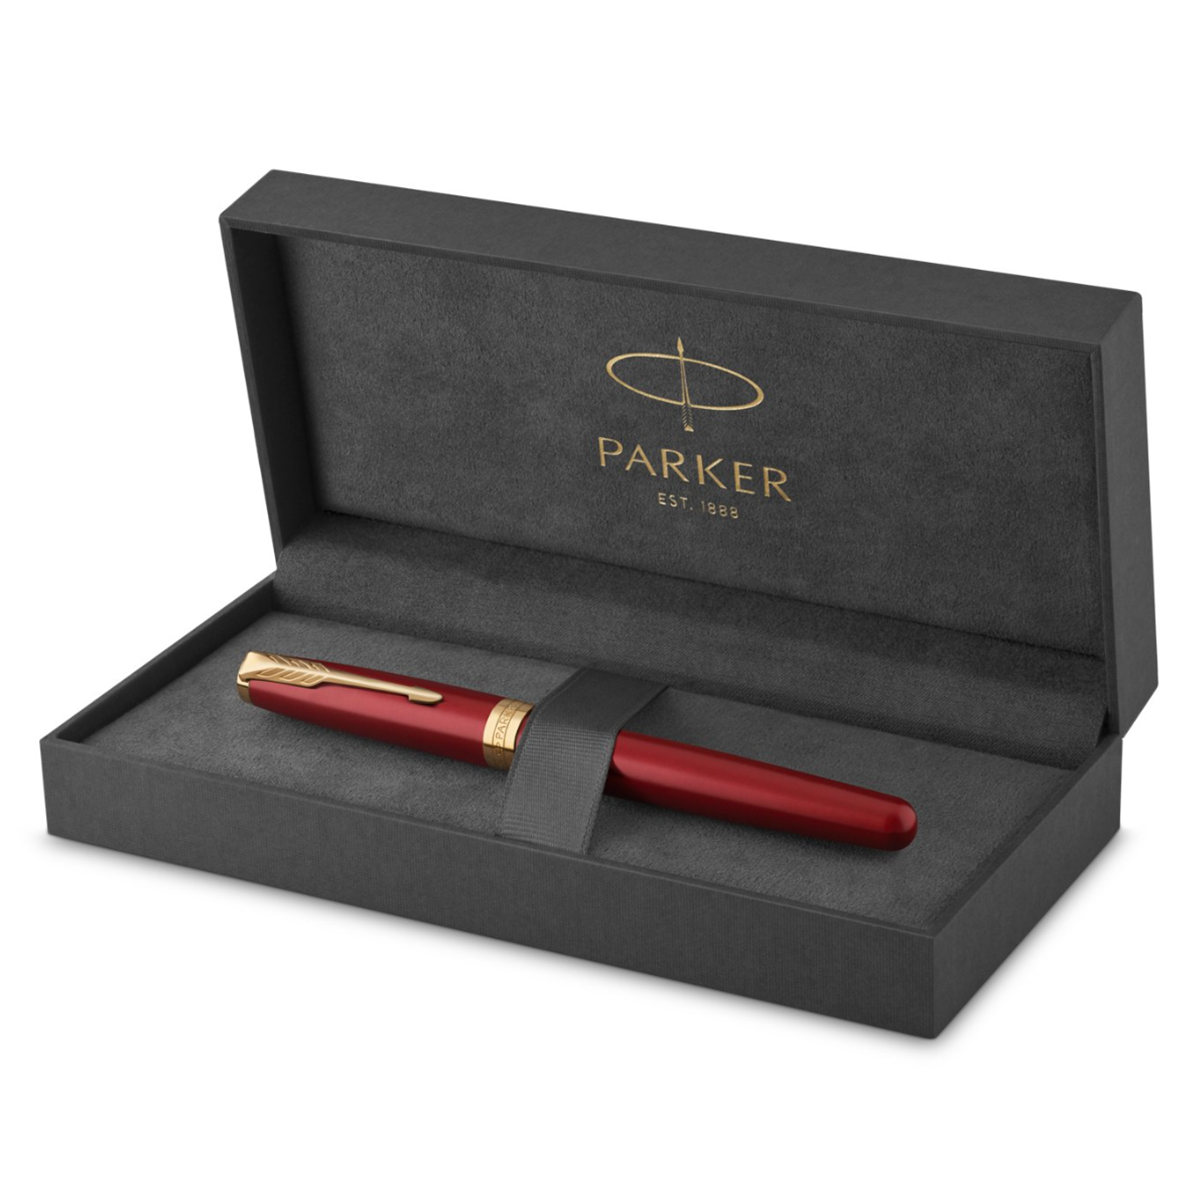 Sonnet Red/Gold Rollerball in the group Pens / Fine Writing / Gift Pens at Pen Store (104829)